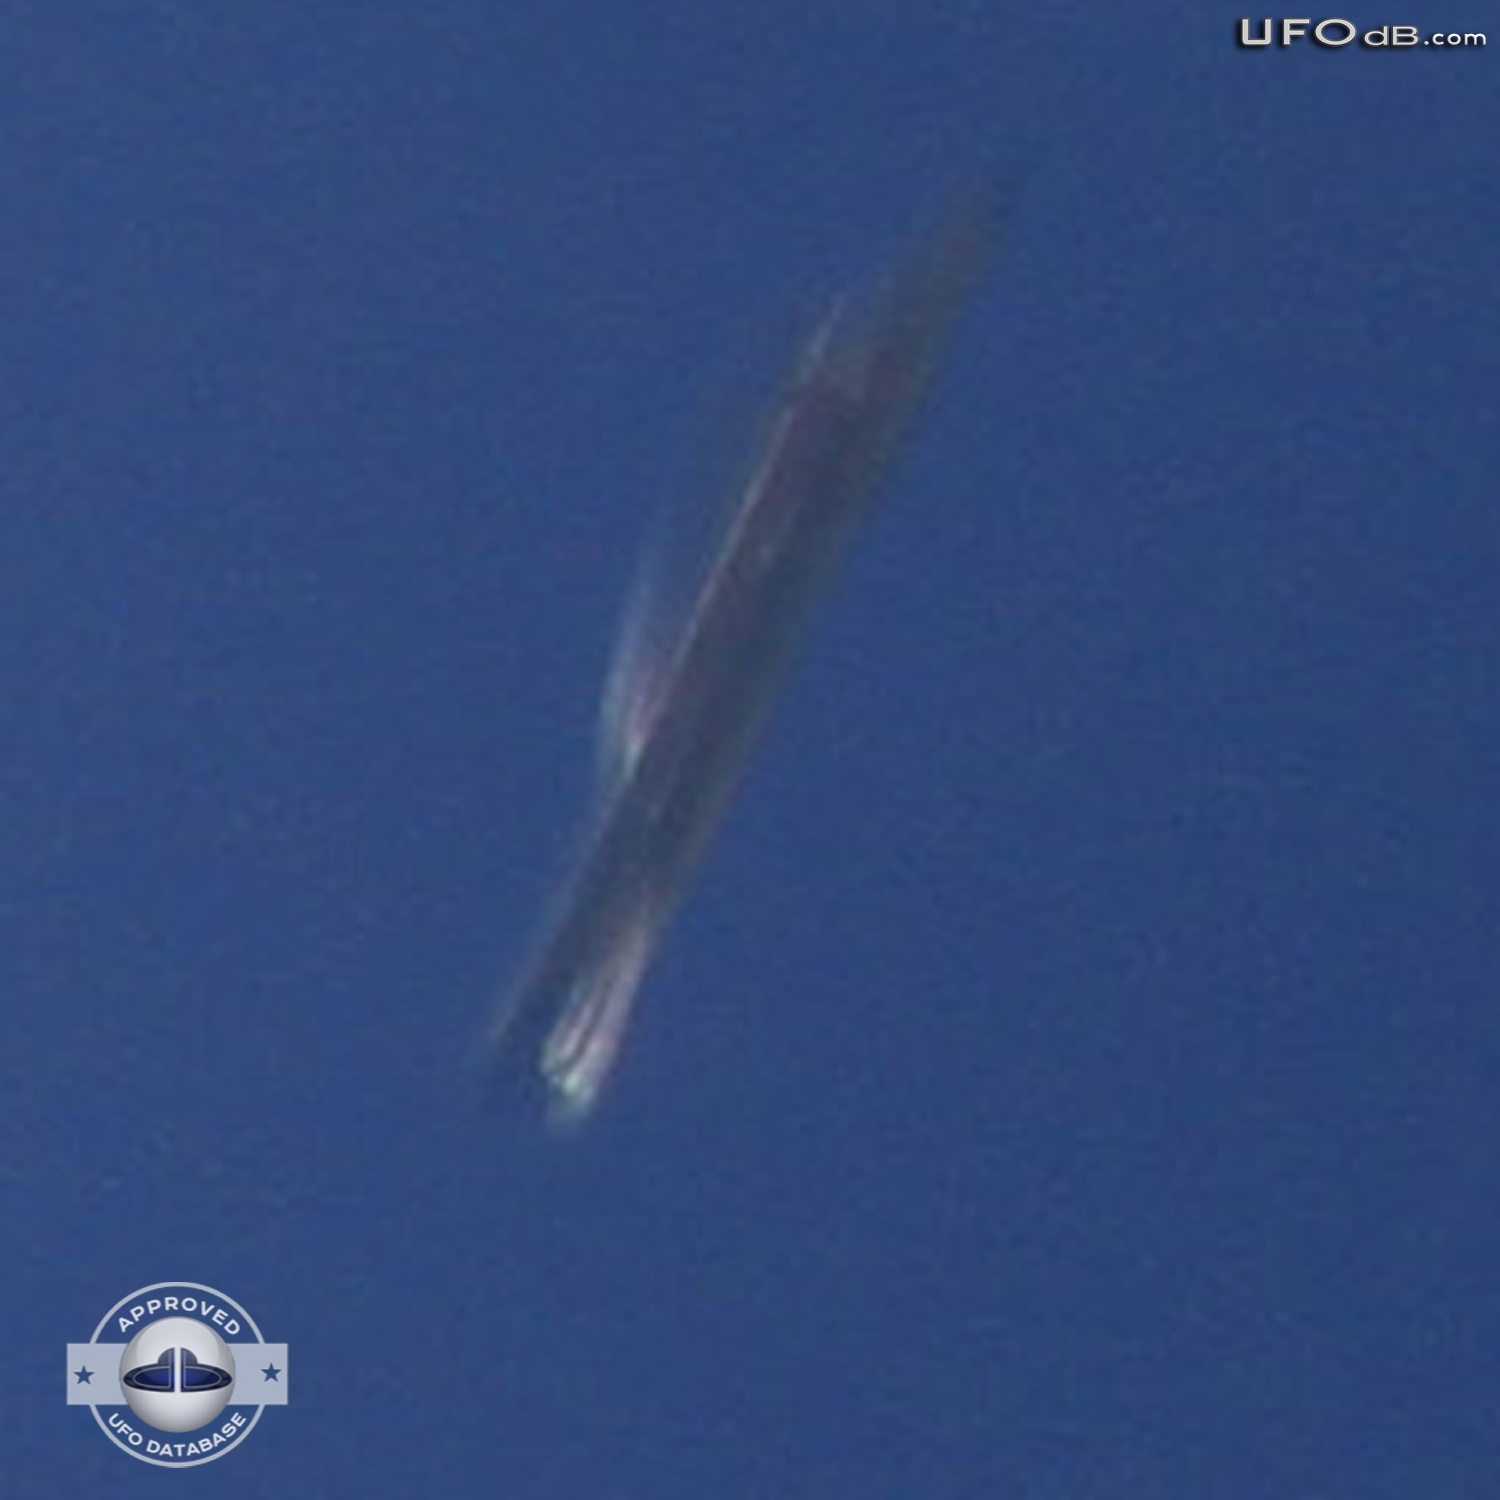 Incredibly Fast UFO caught on picture in Michigan, USA | May 24 2011 UFO Picture #326-4